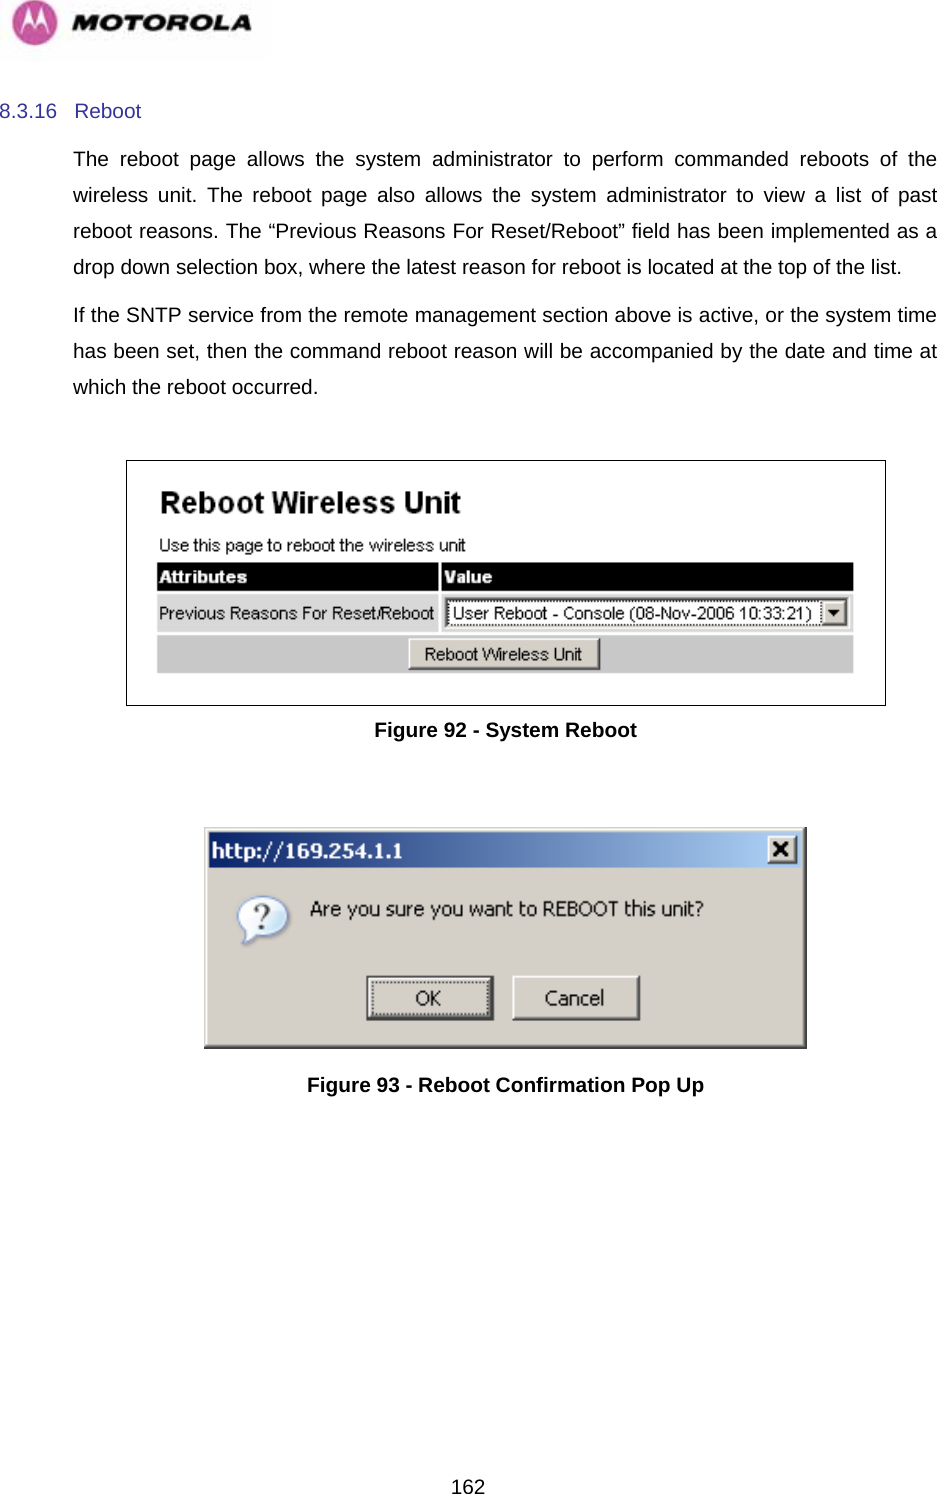   1628.3.16 Reboot  The reboot page allows the system administrator to perform commanded reboots of the wireless unit. The reboot page also allows the system administrator to view a list of past reboot reasons. The “Previous Reasons For Reset/Reboot” field has been implemented as a drop down selection box, where the latest reason for reboot is located at the top of the list. If the SNTP service from the remote management section above is active, or the system time has been set, then the command reboot reason will be accompanied by the date and time at which the reboot occurred.   Figure 92 - System Reboot   Figure 93 - Reboot Confirmation Pop Up 